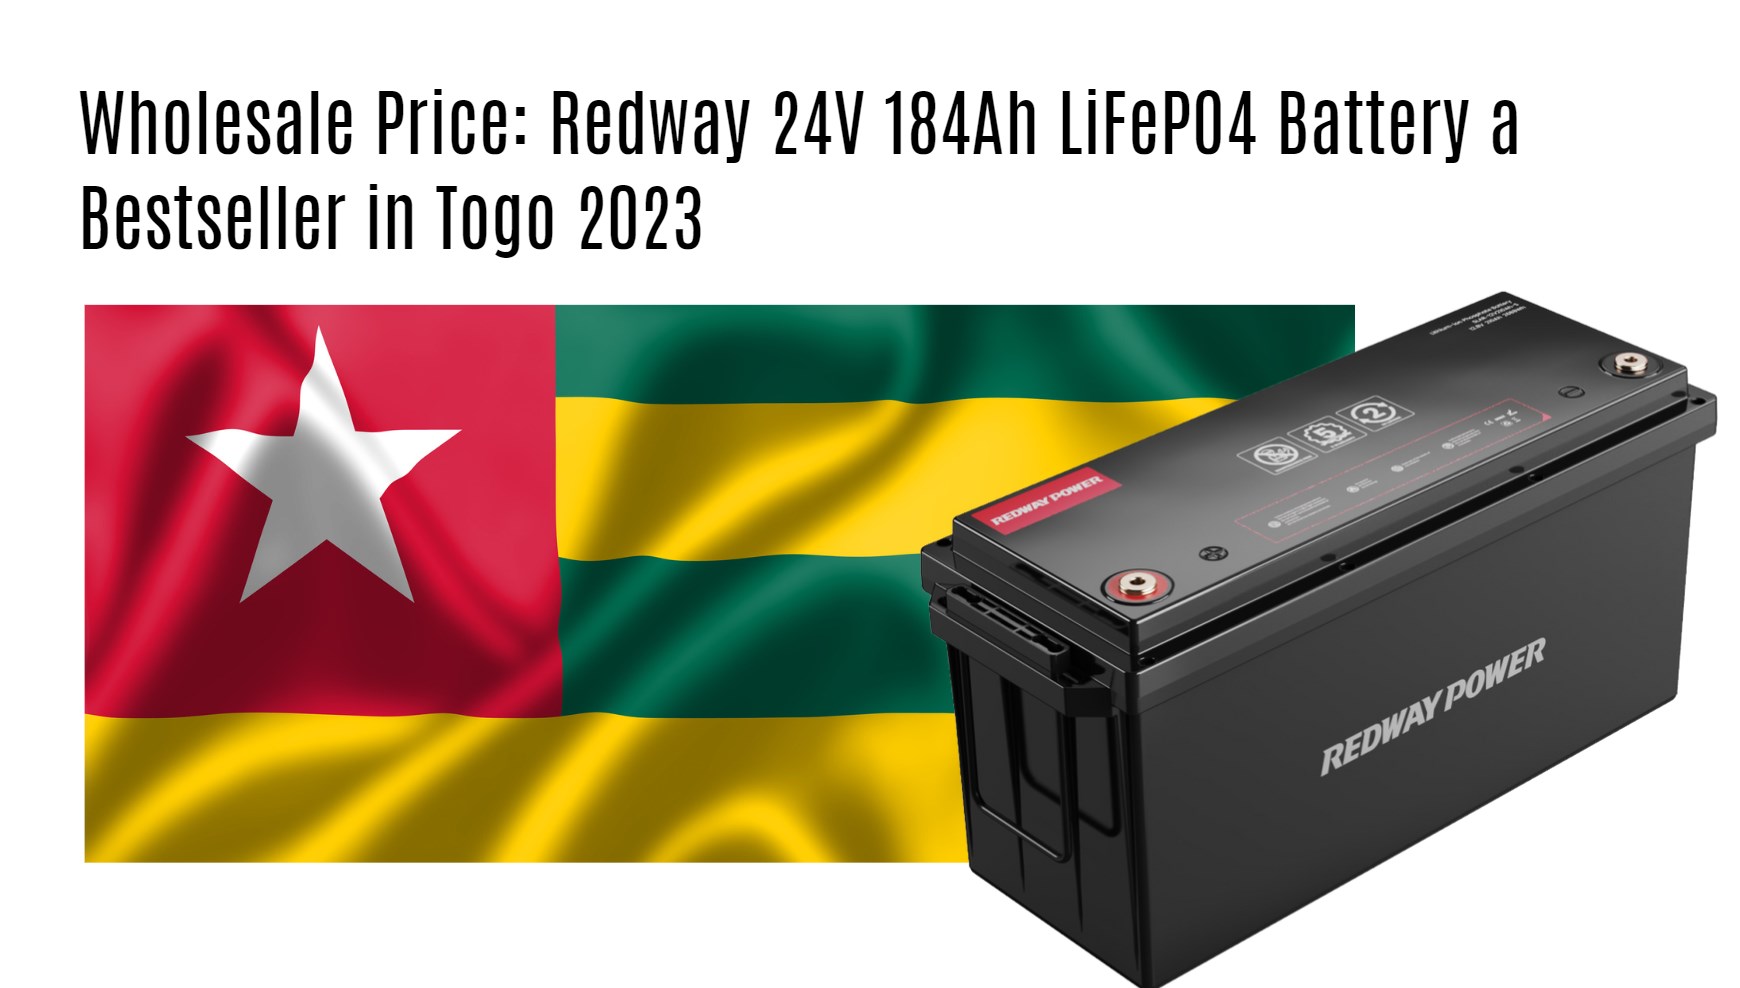 Wholesale Price: Redway 24V 184Ah LiFePO4 Battery a Bestseller in Togo 2023